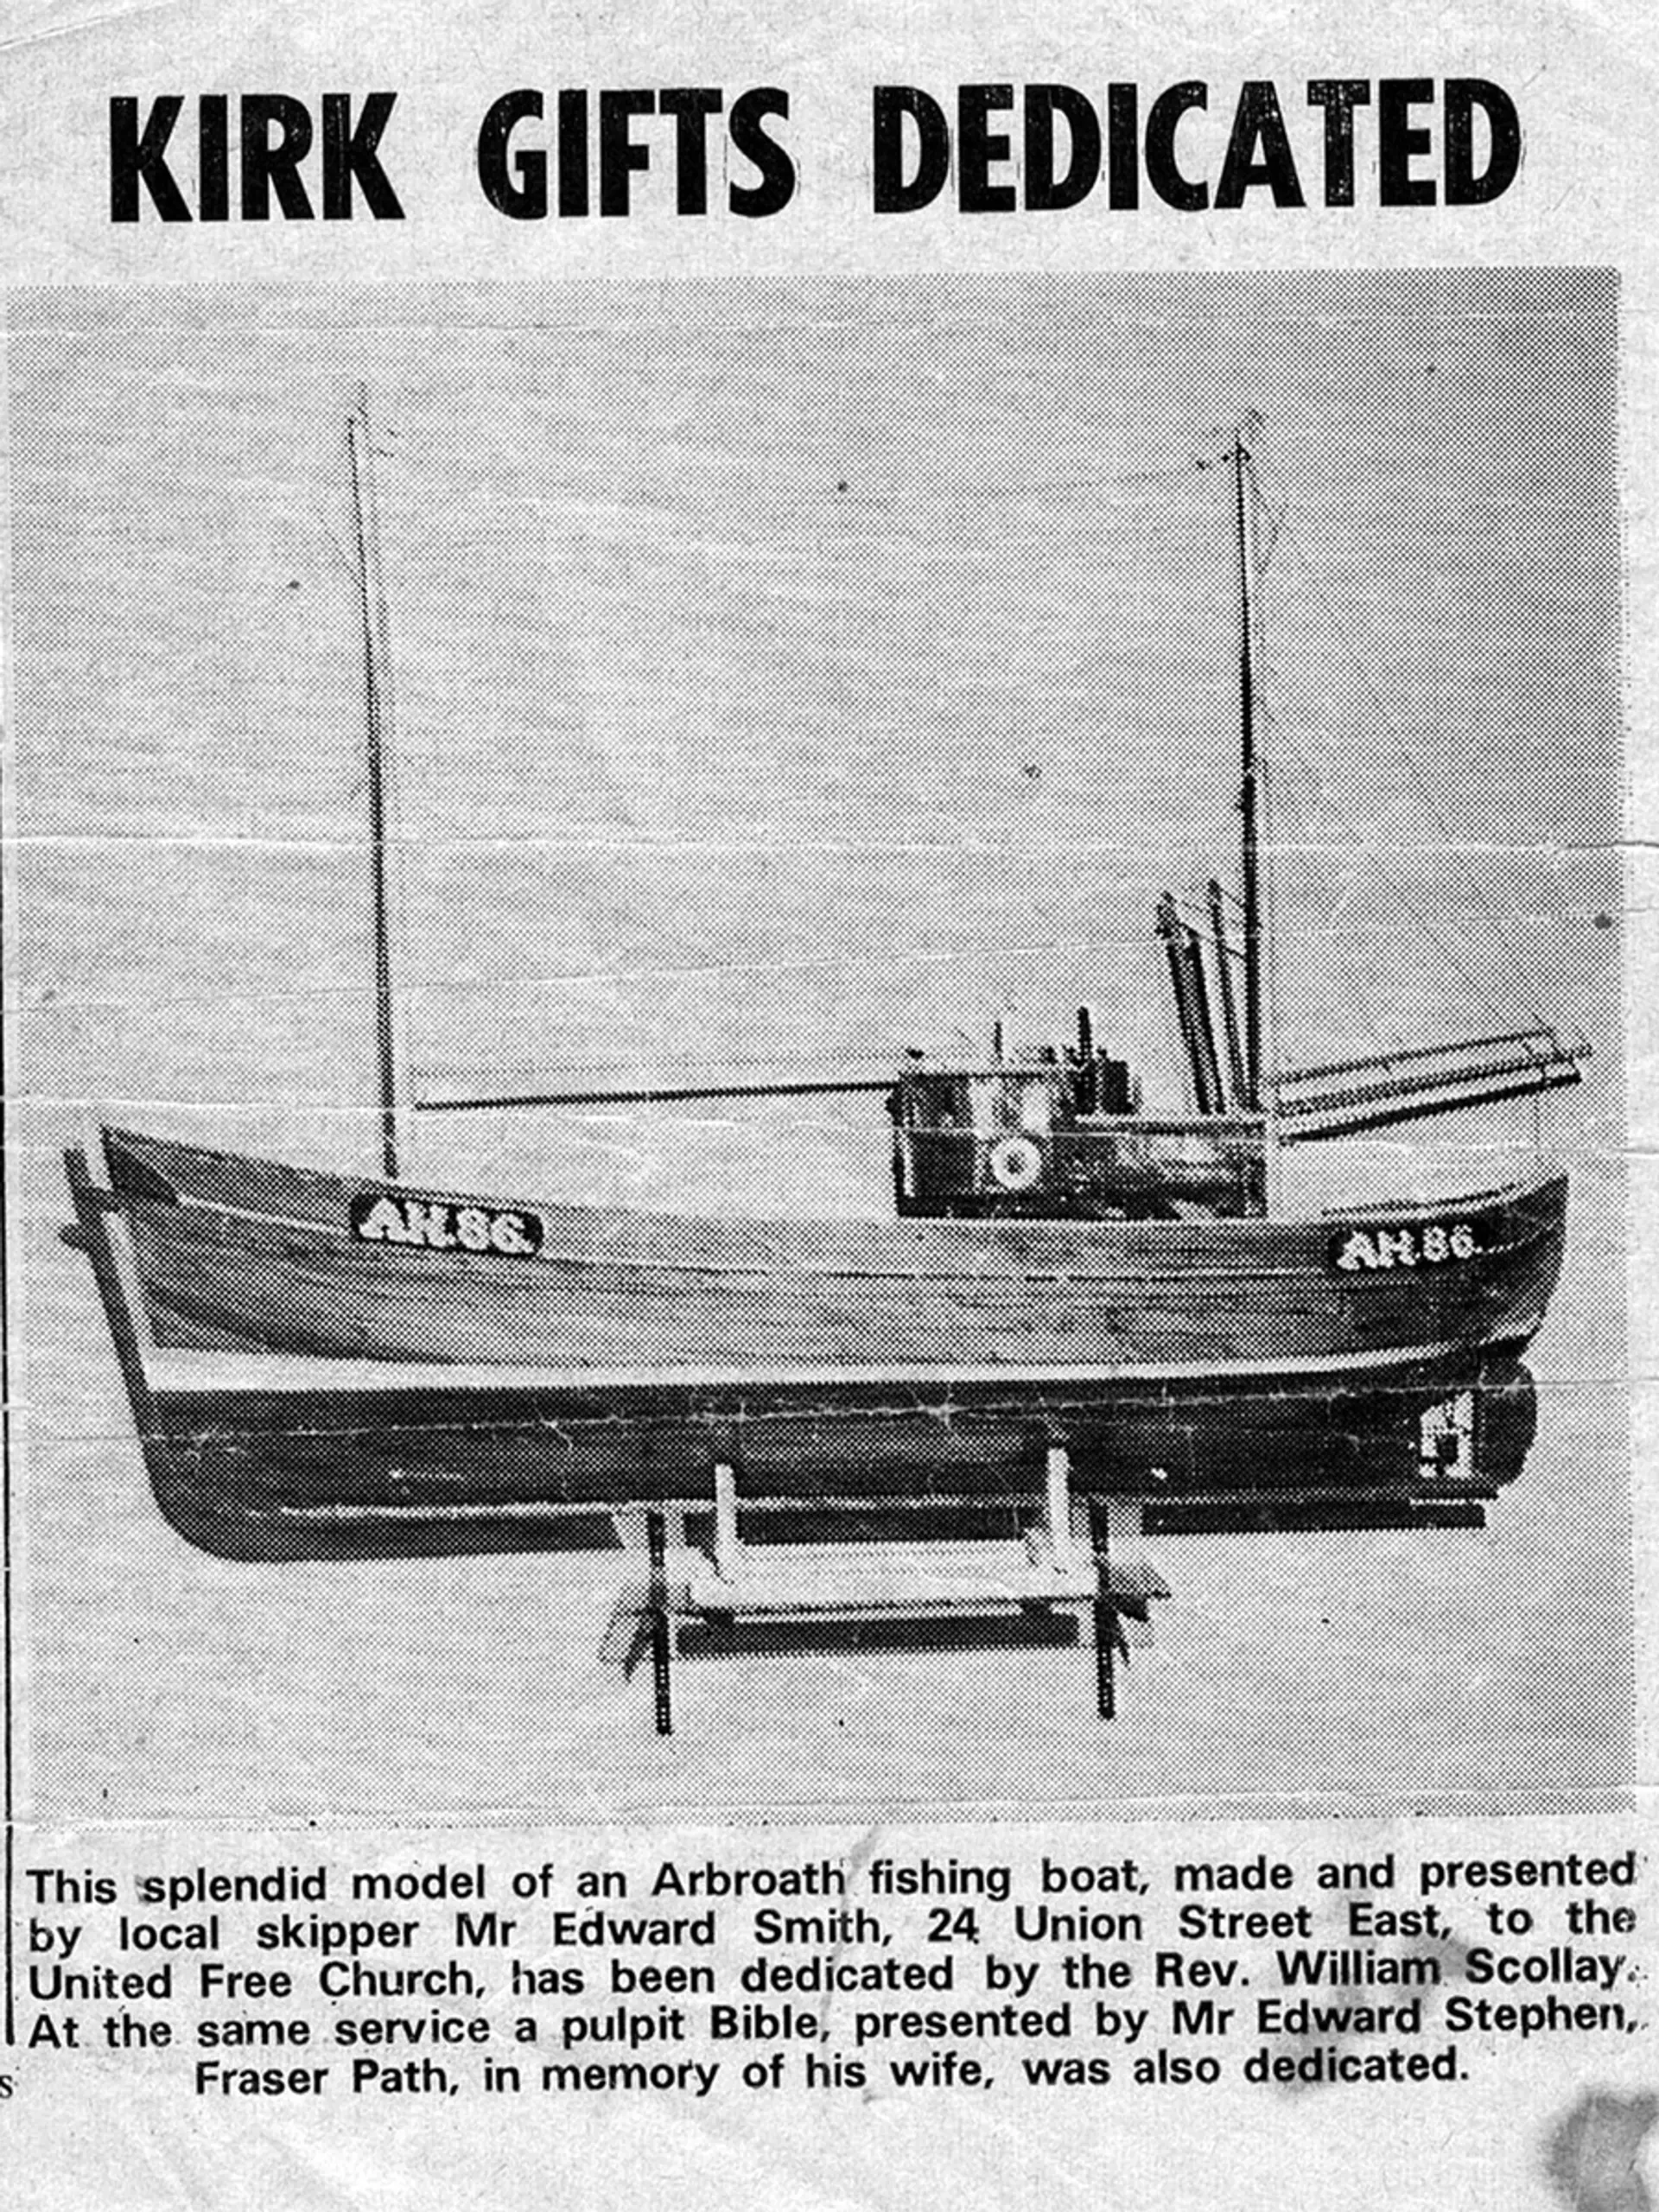 A cut out of a newspaper from the past. The title reads ‘KIRK GIFTS DEDICATED’ and there is a black and white image of a fishing boat.